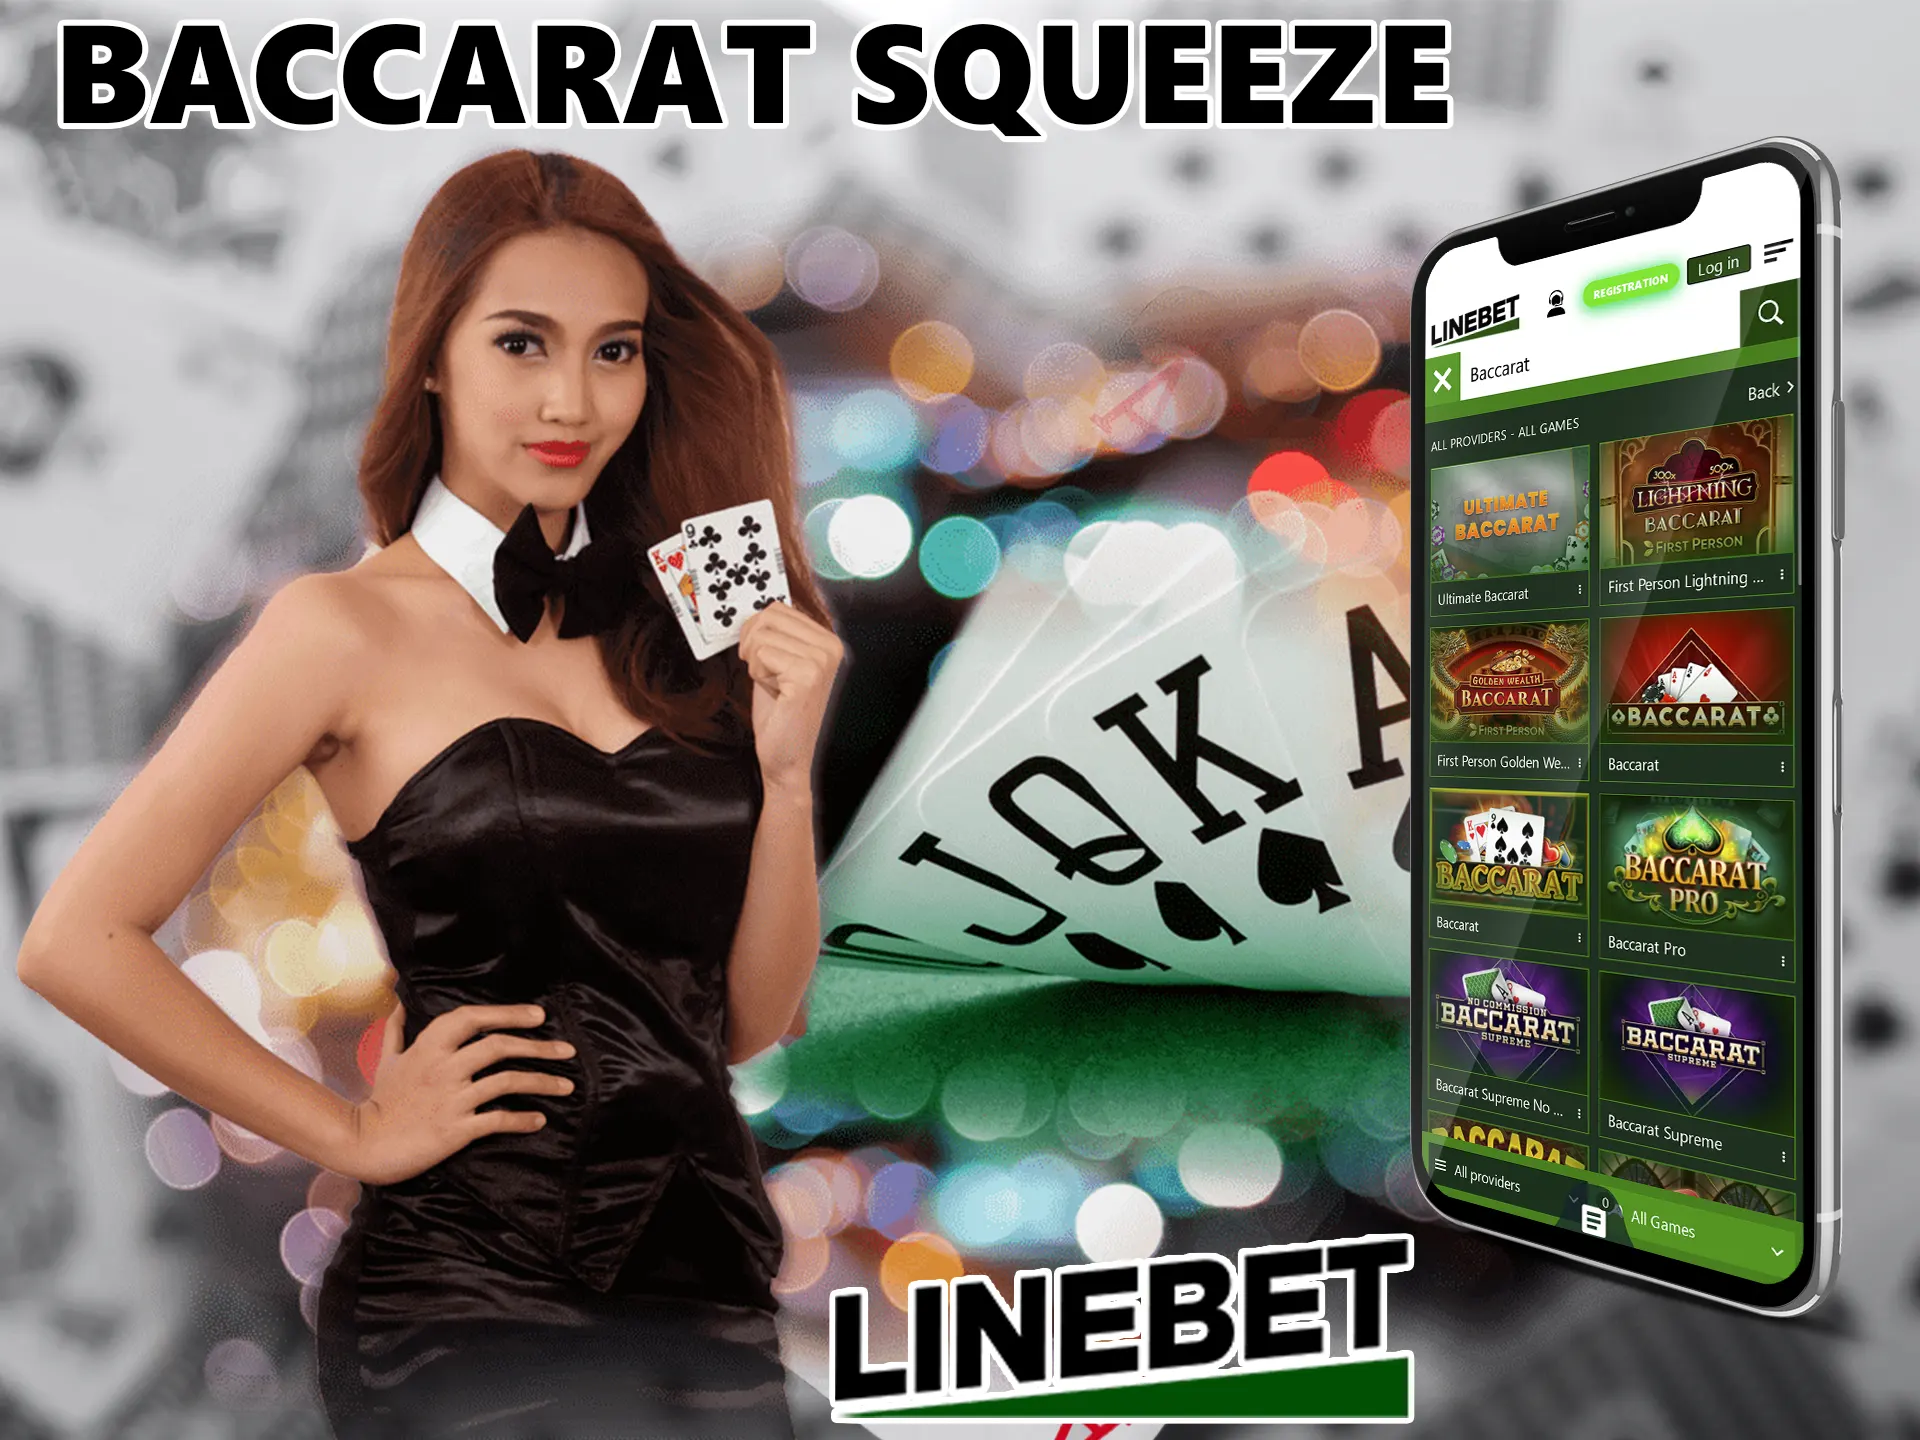 In this section of Linebet Casino, the cards are dealt face down and then the dealer reveals one at a time, creating incredible action during play.